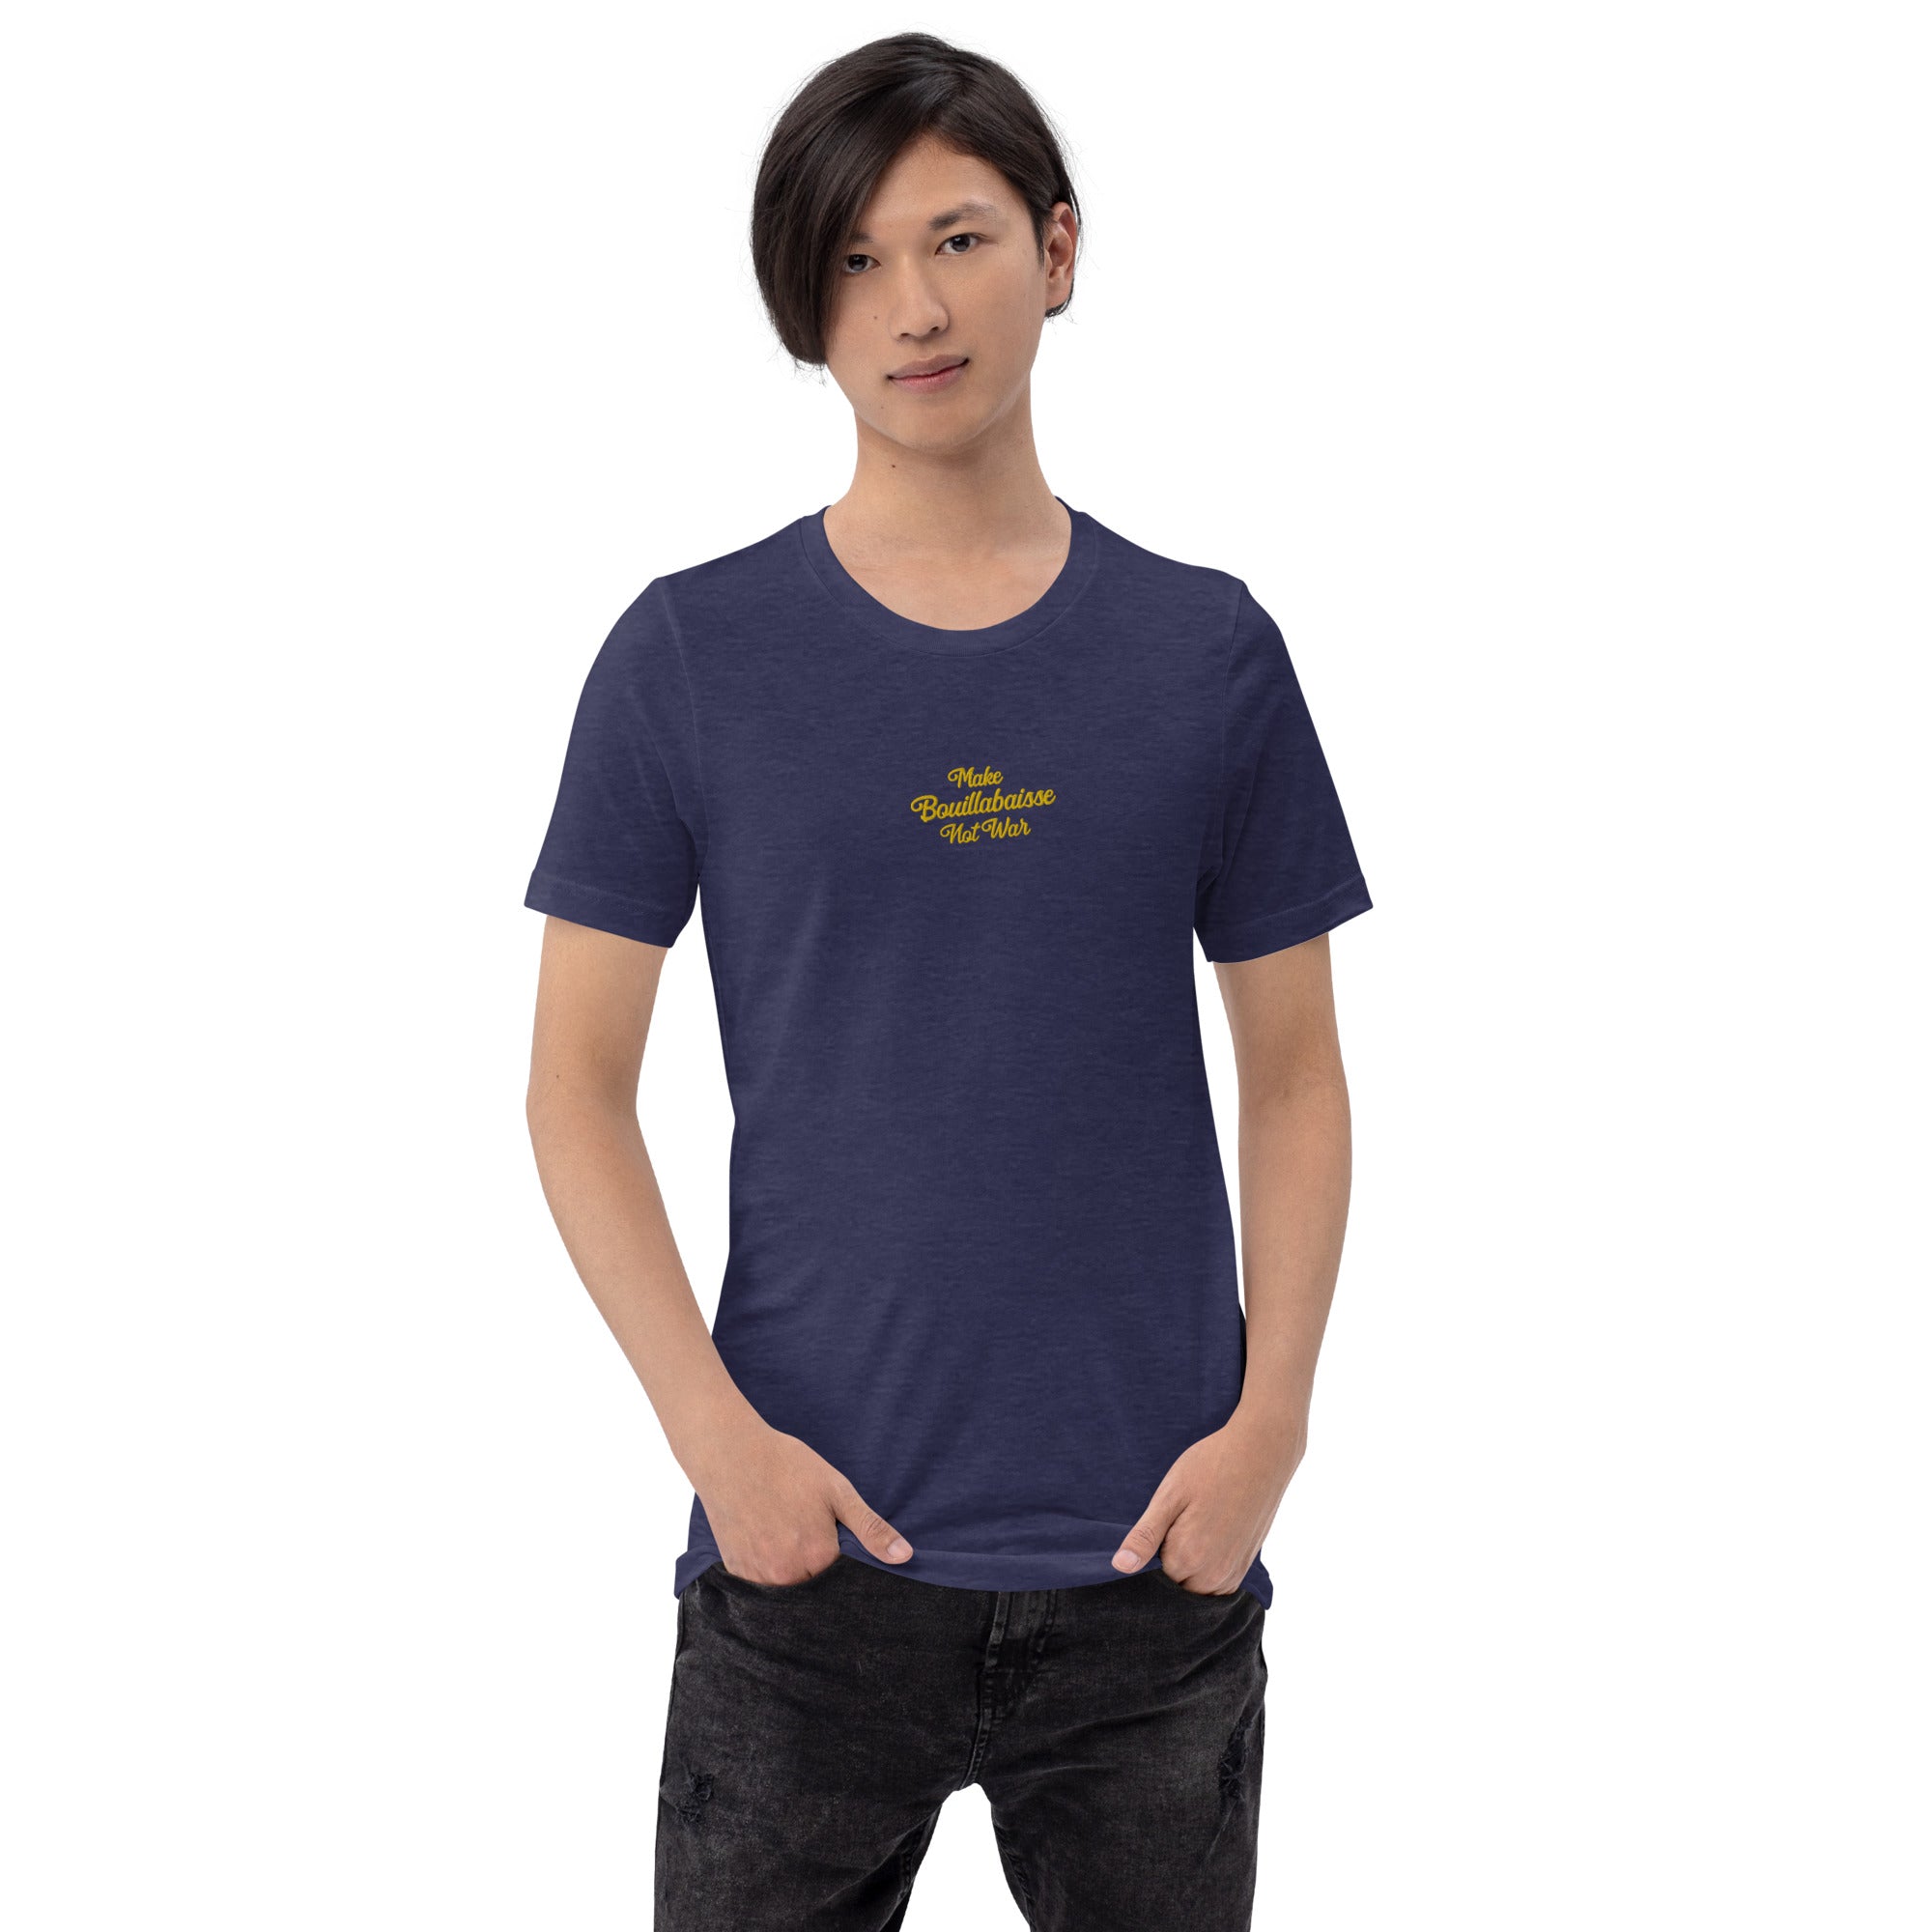 Unisex t-shirt Make Bouillabaisse Not War Text Only gold embroidered pattern on dark heather colors